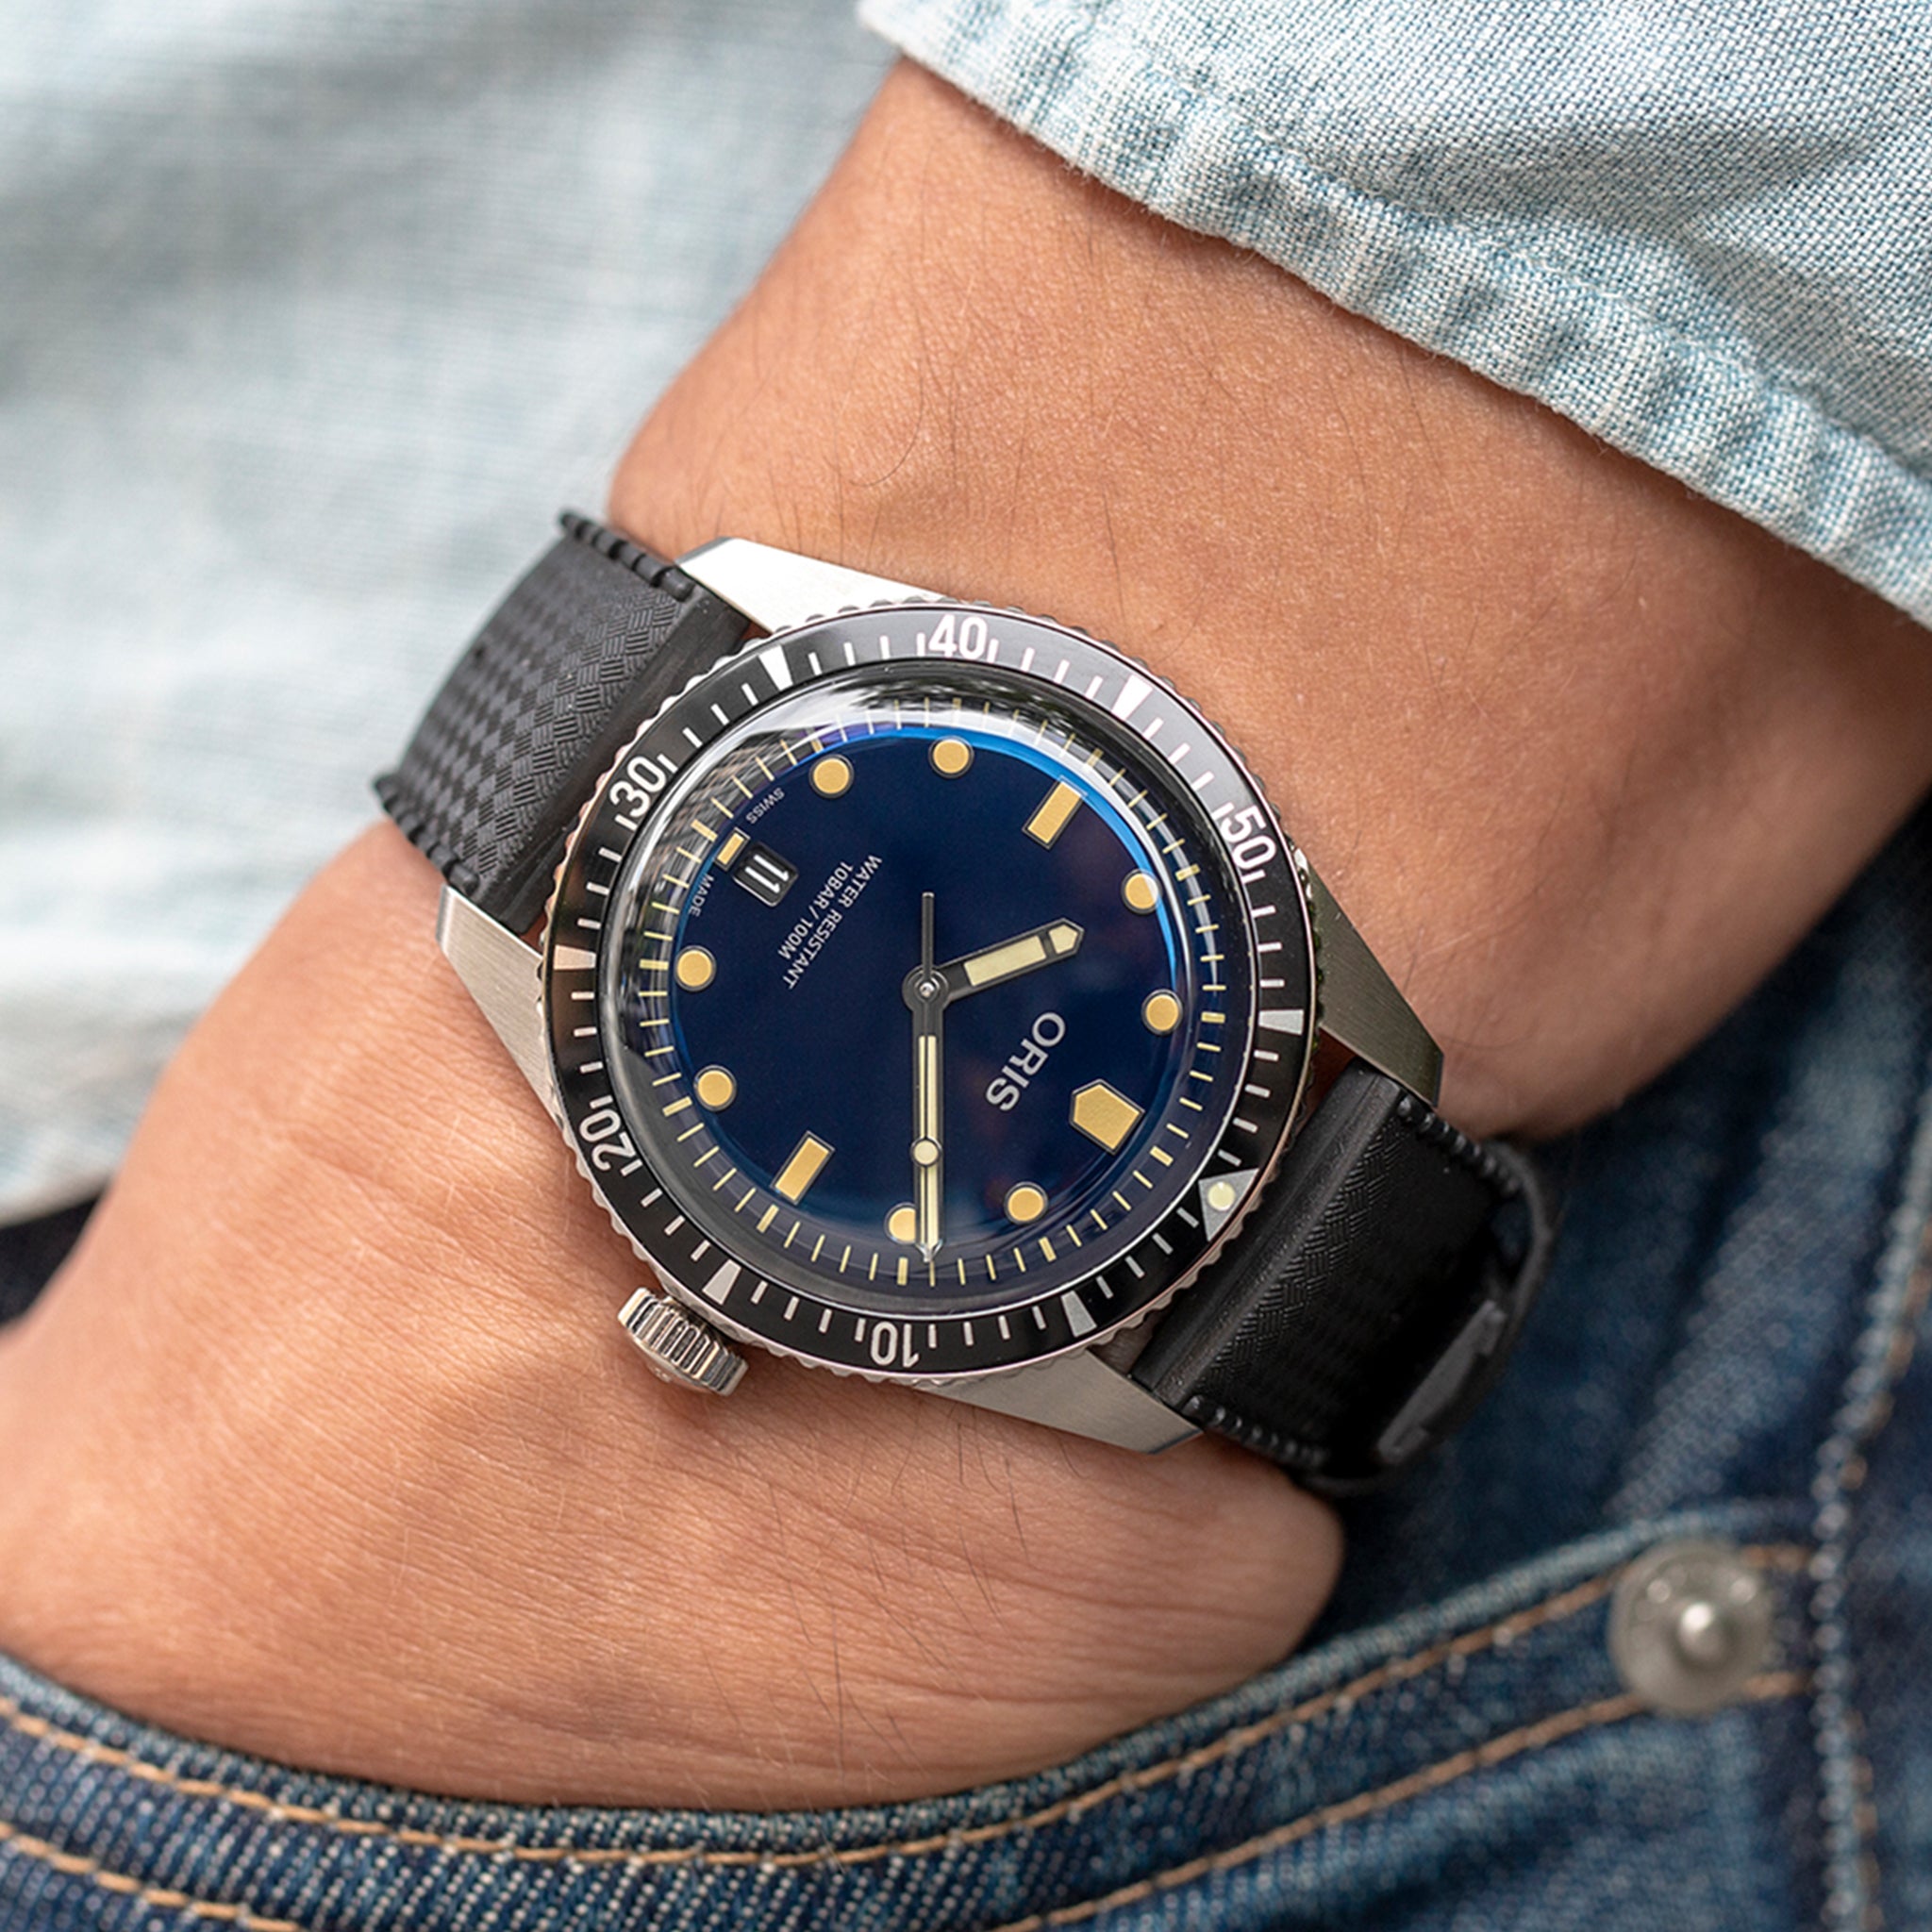 oris diver watches for sale